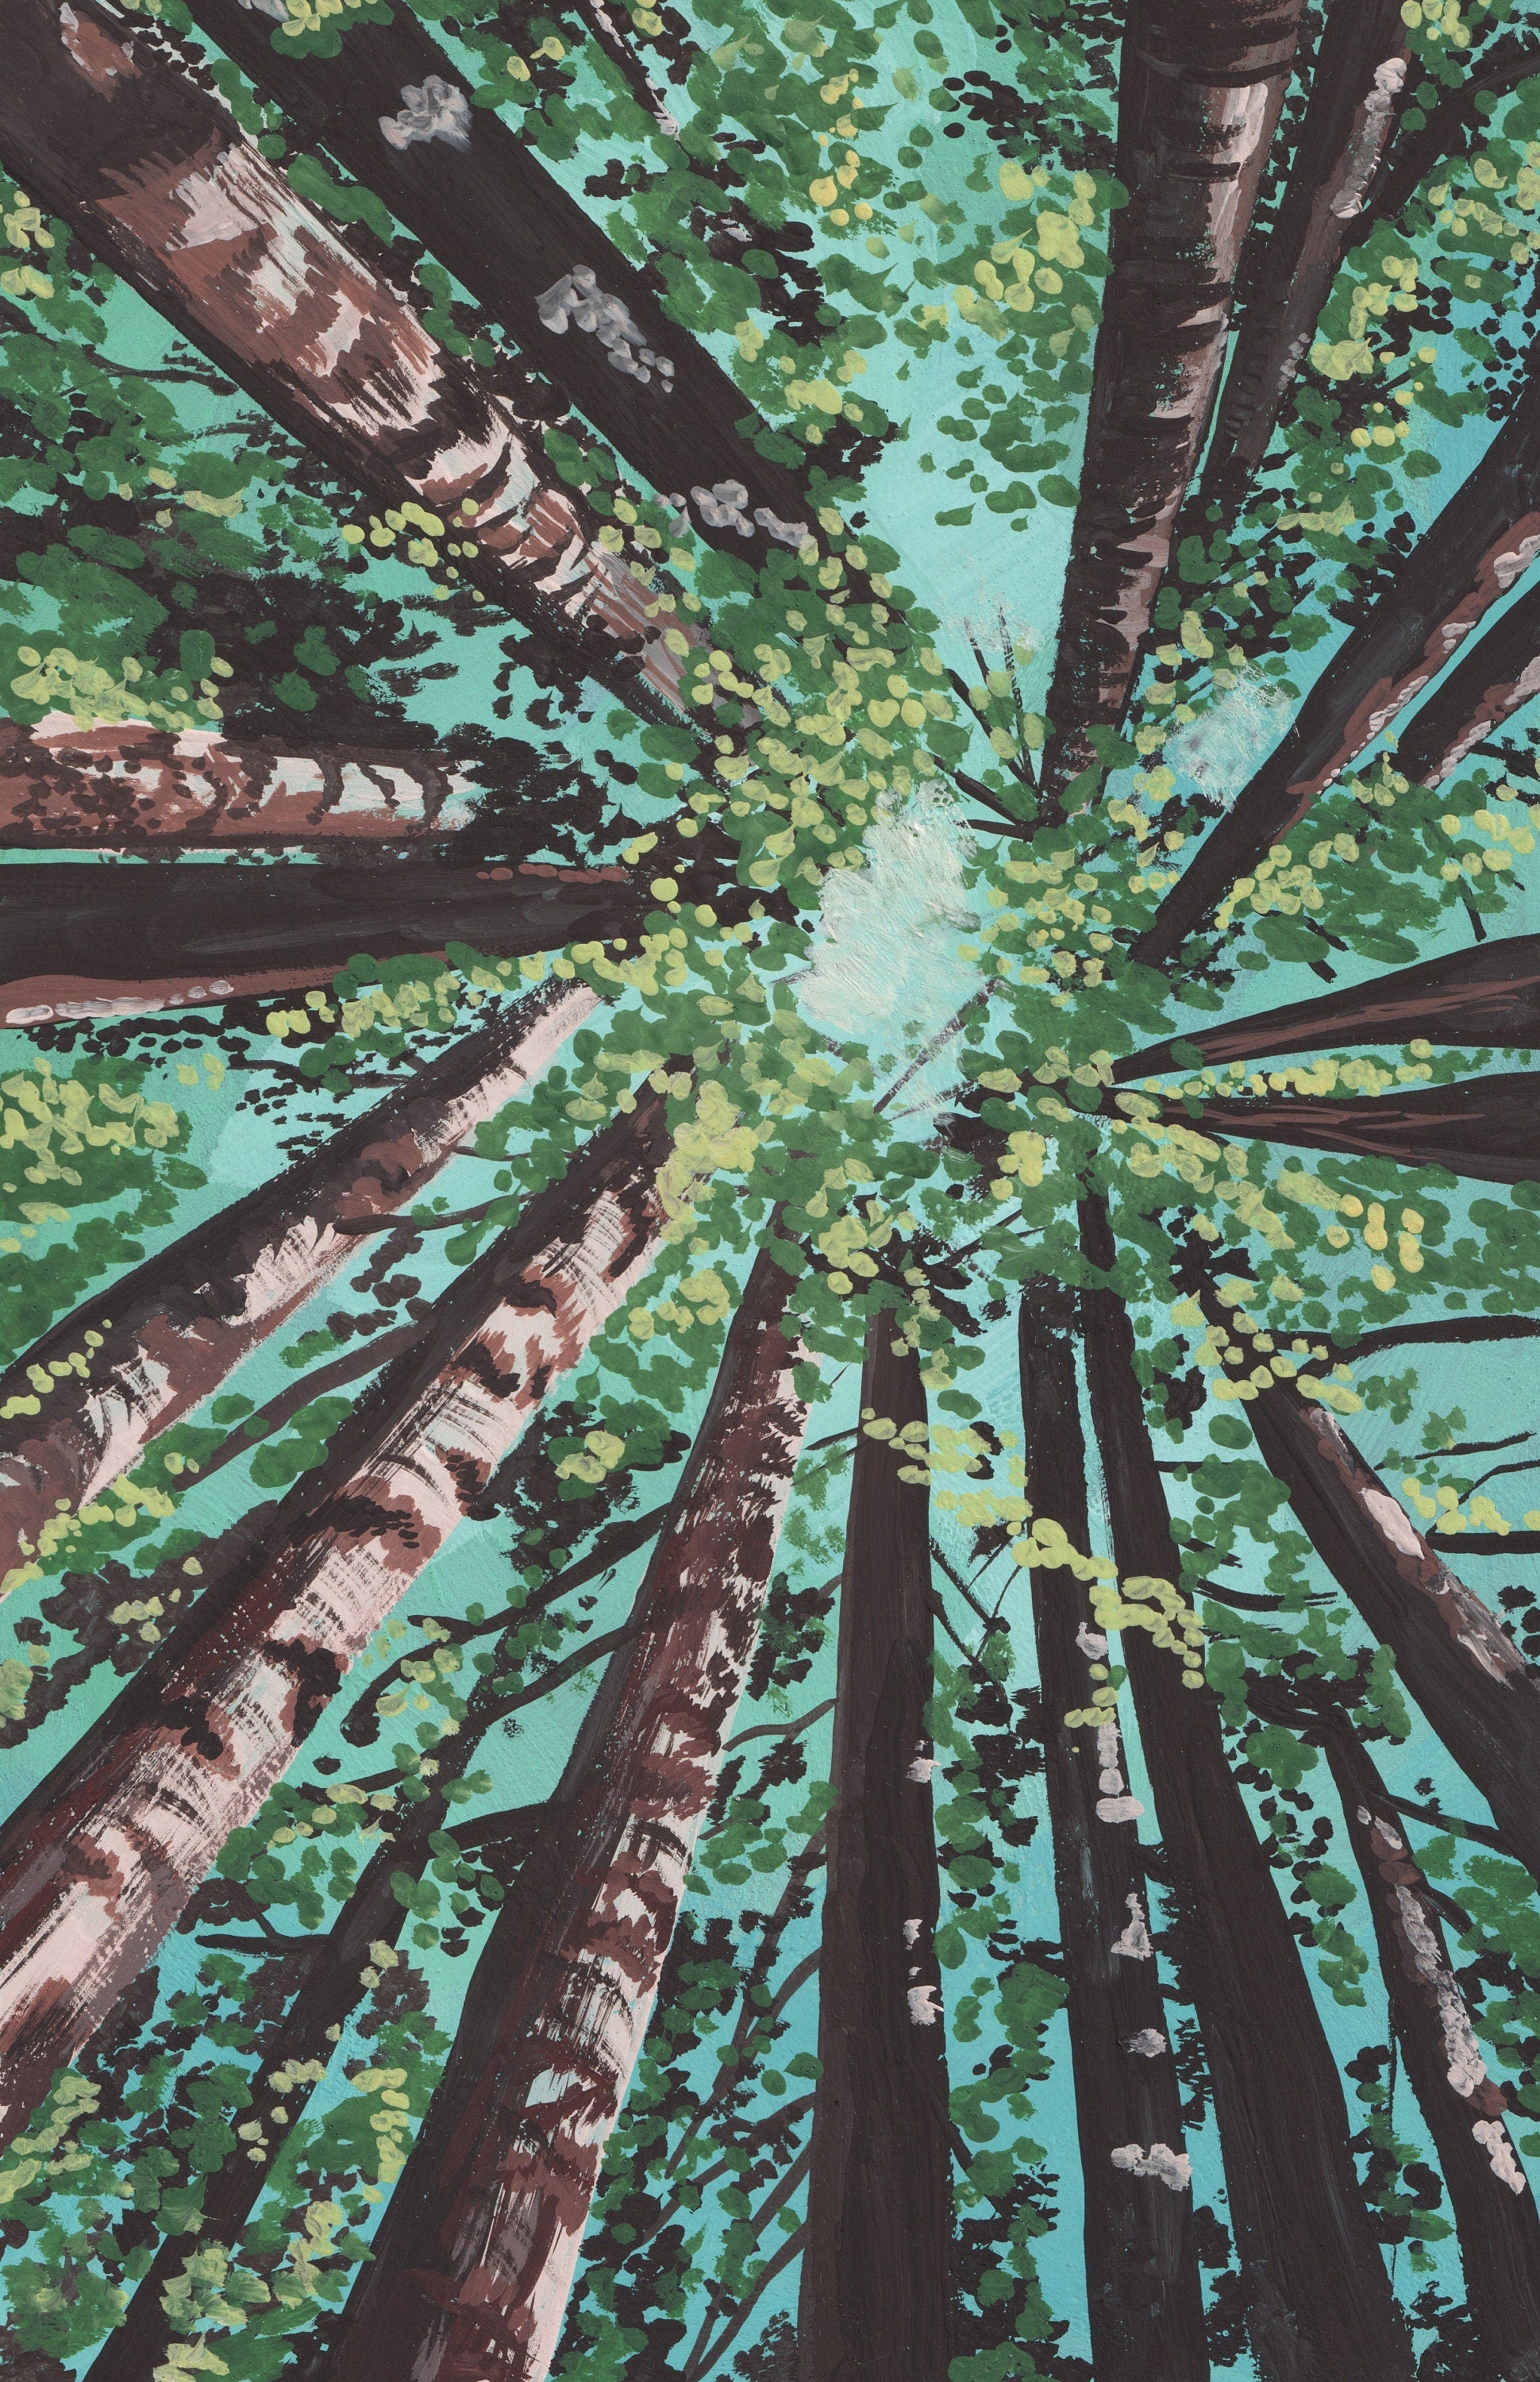 A gouache print of Californian redwood trees from the perspective of standing on the ground and looking up at the sky